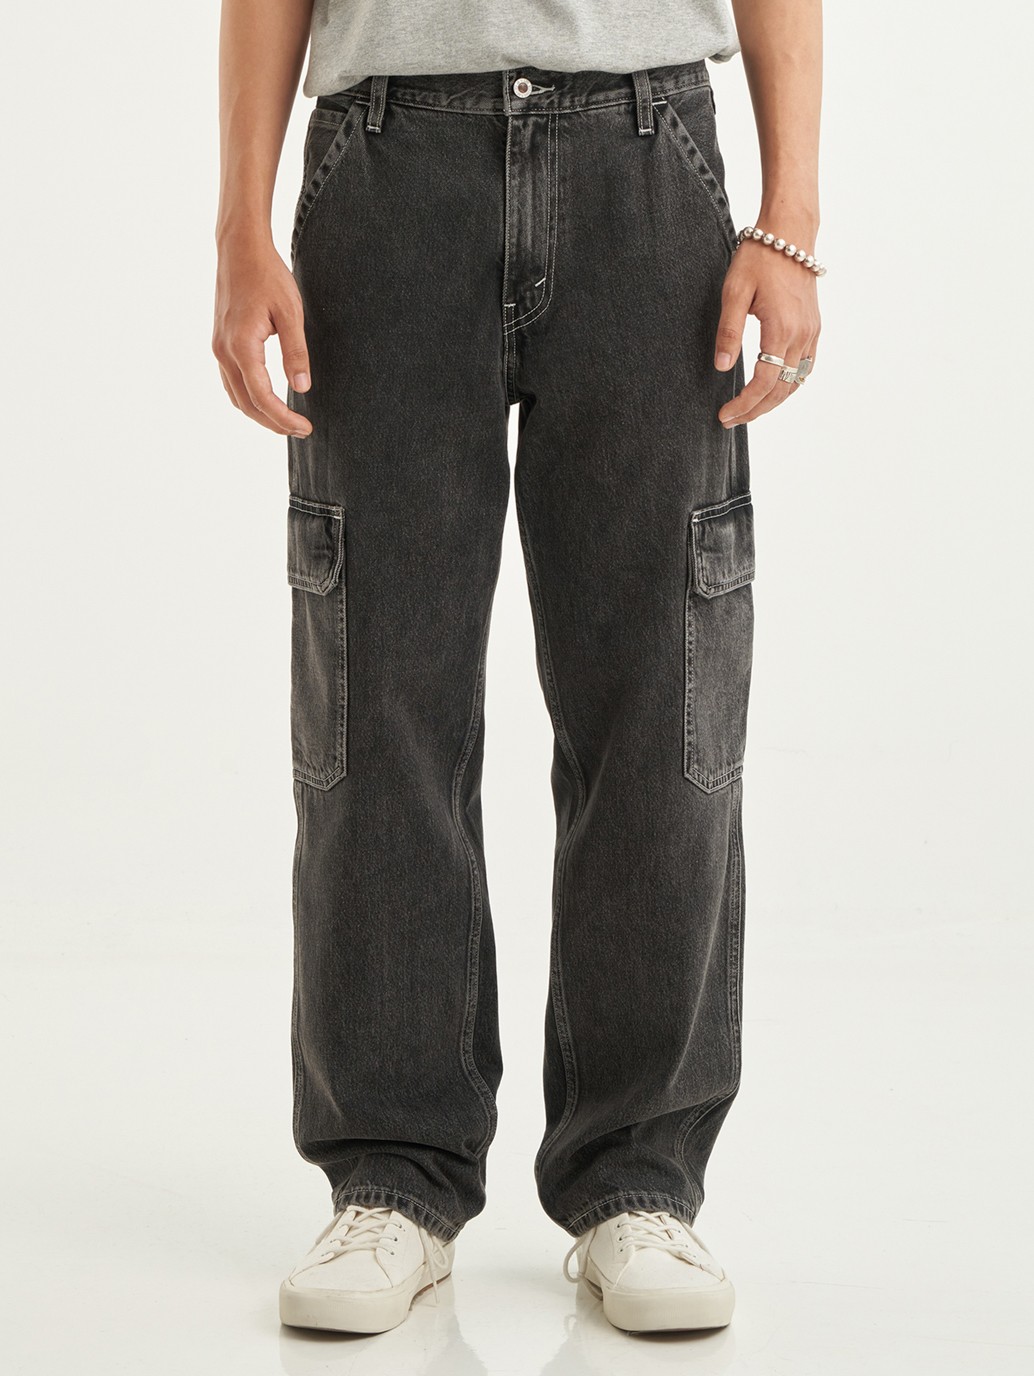 Levi's® Men's Stay Loose Cargo Pants - Vetiver Twill | Levi's MY